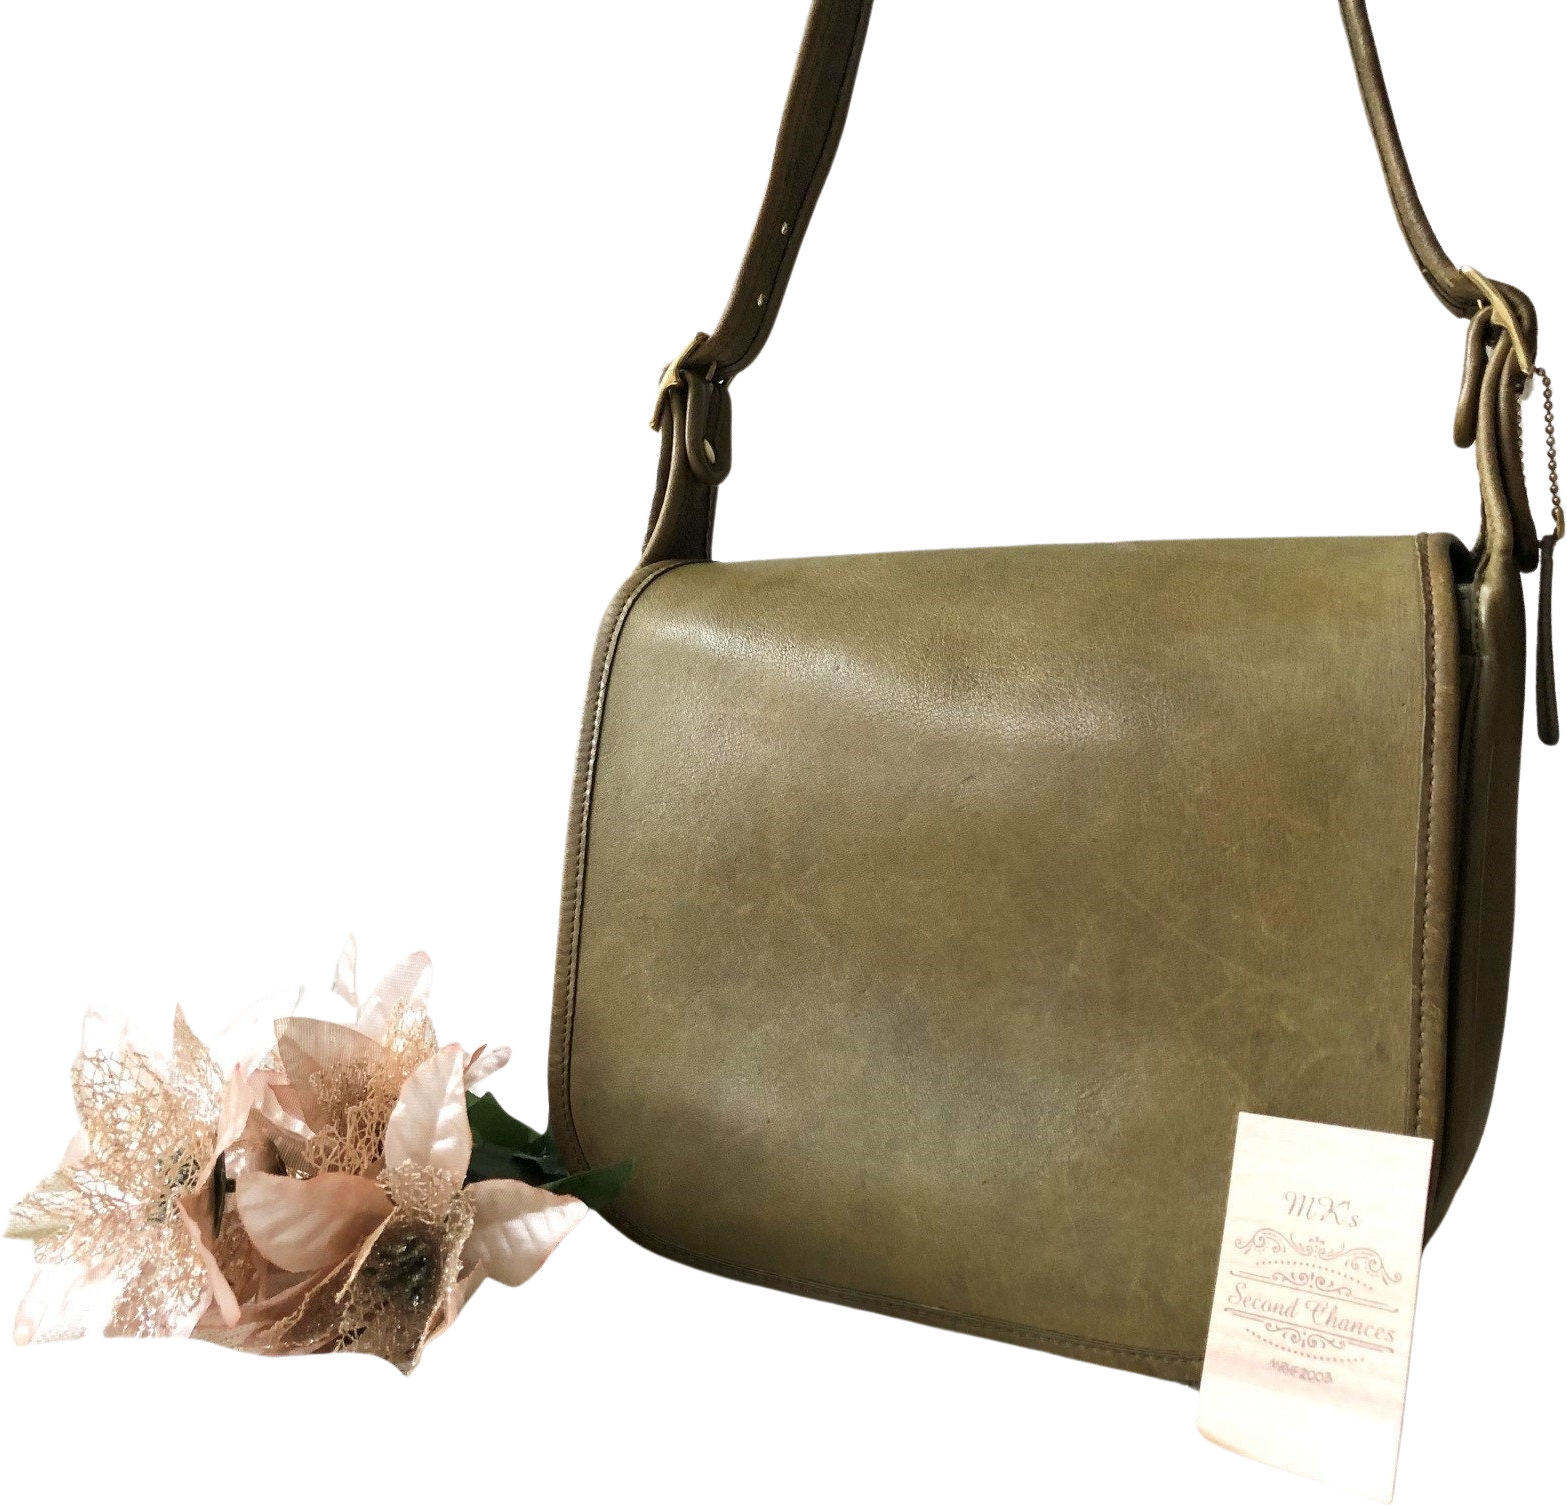 Vintage Coach Classic Shoulder Bag 9170 in Putty Leather NYC 